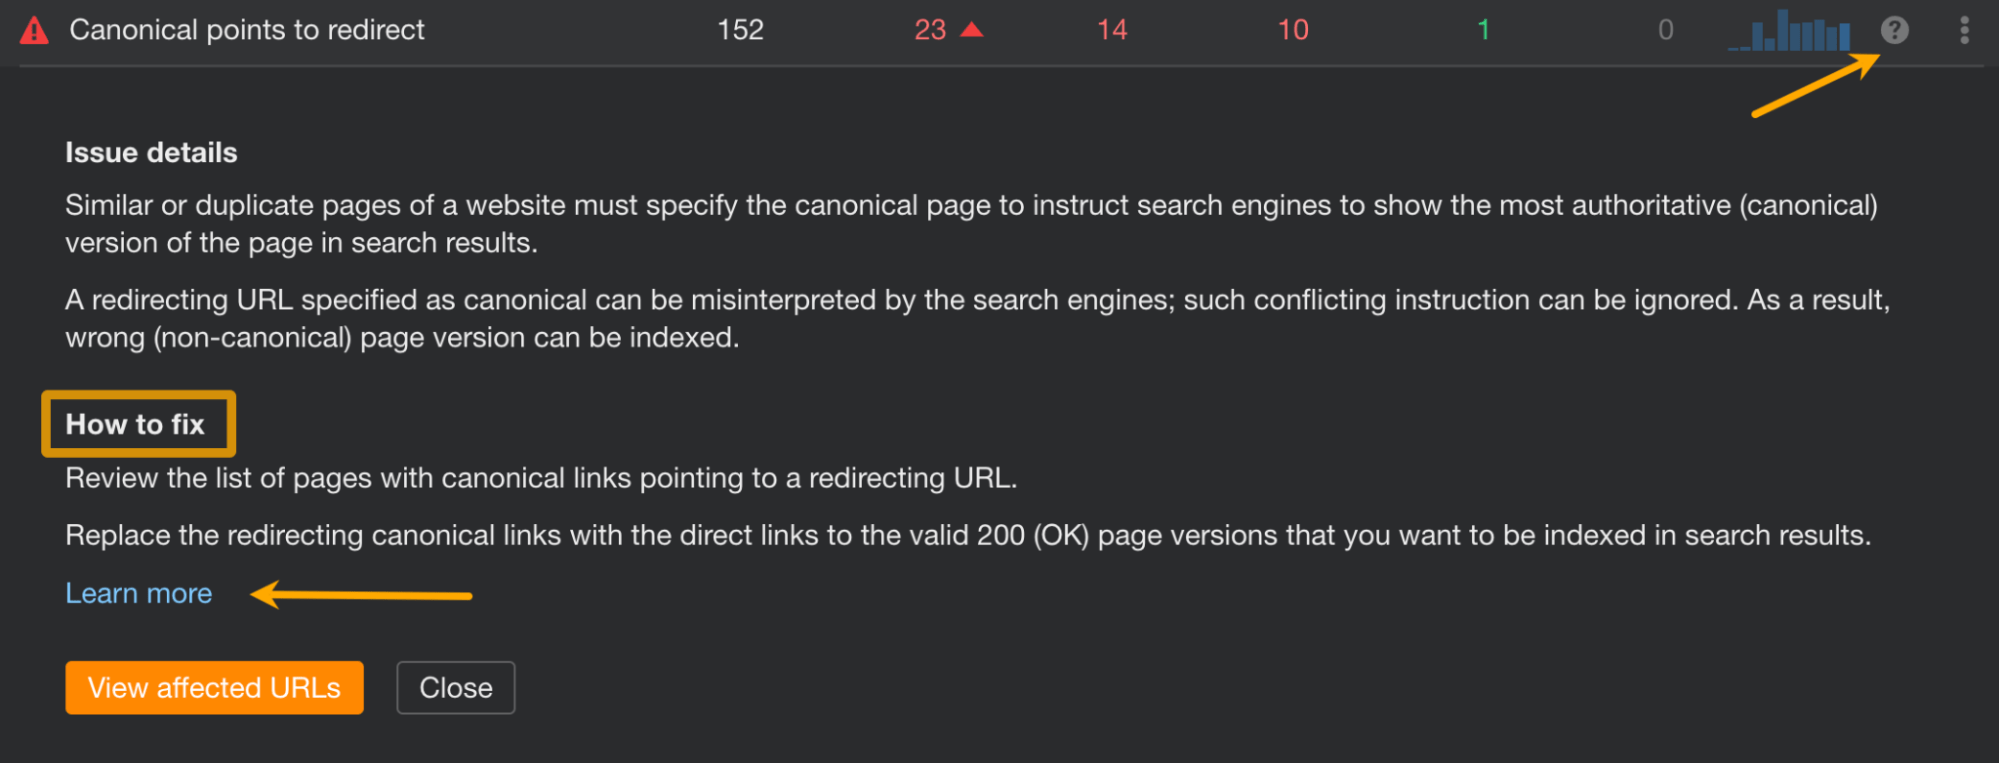 Instruction on how to fix an SEO issue in Site Audit